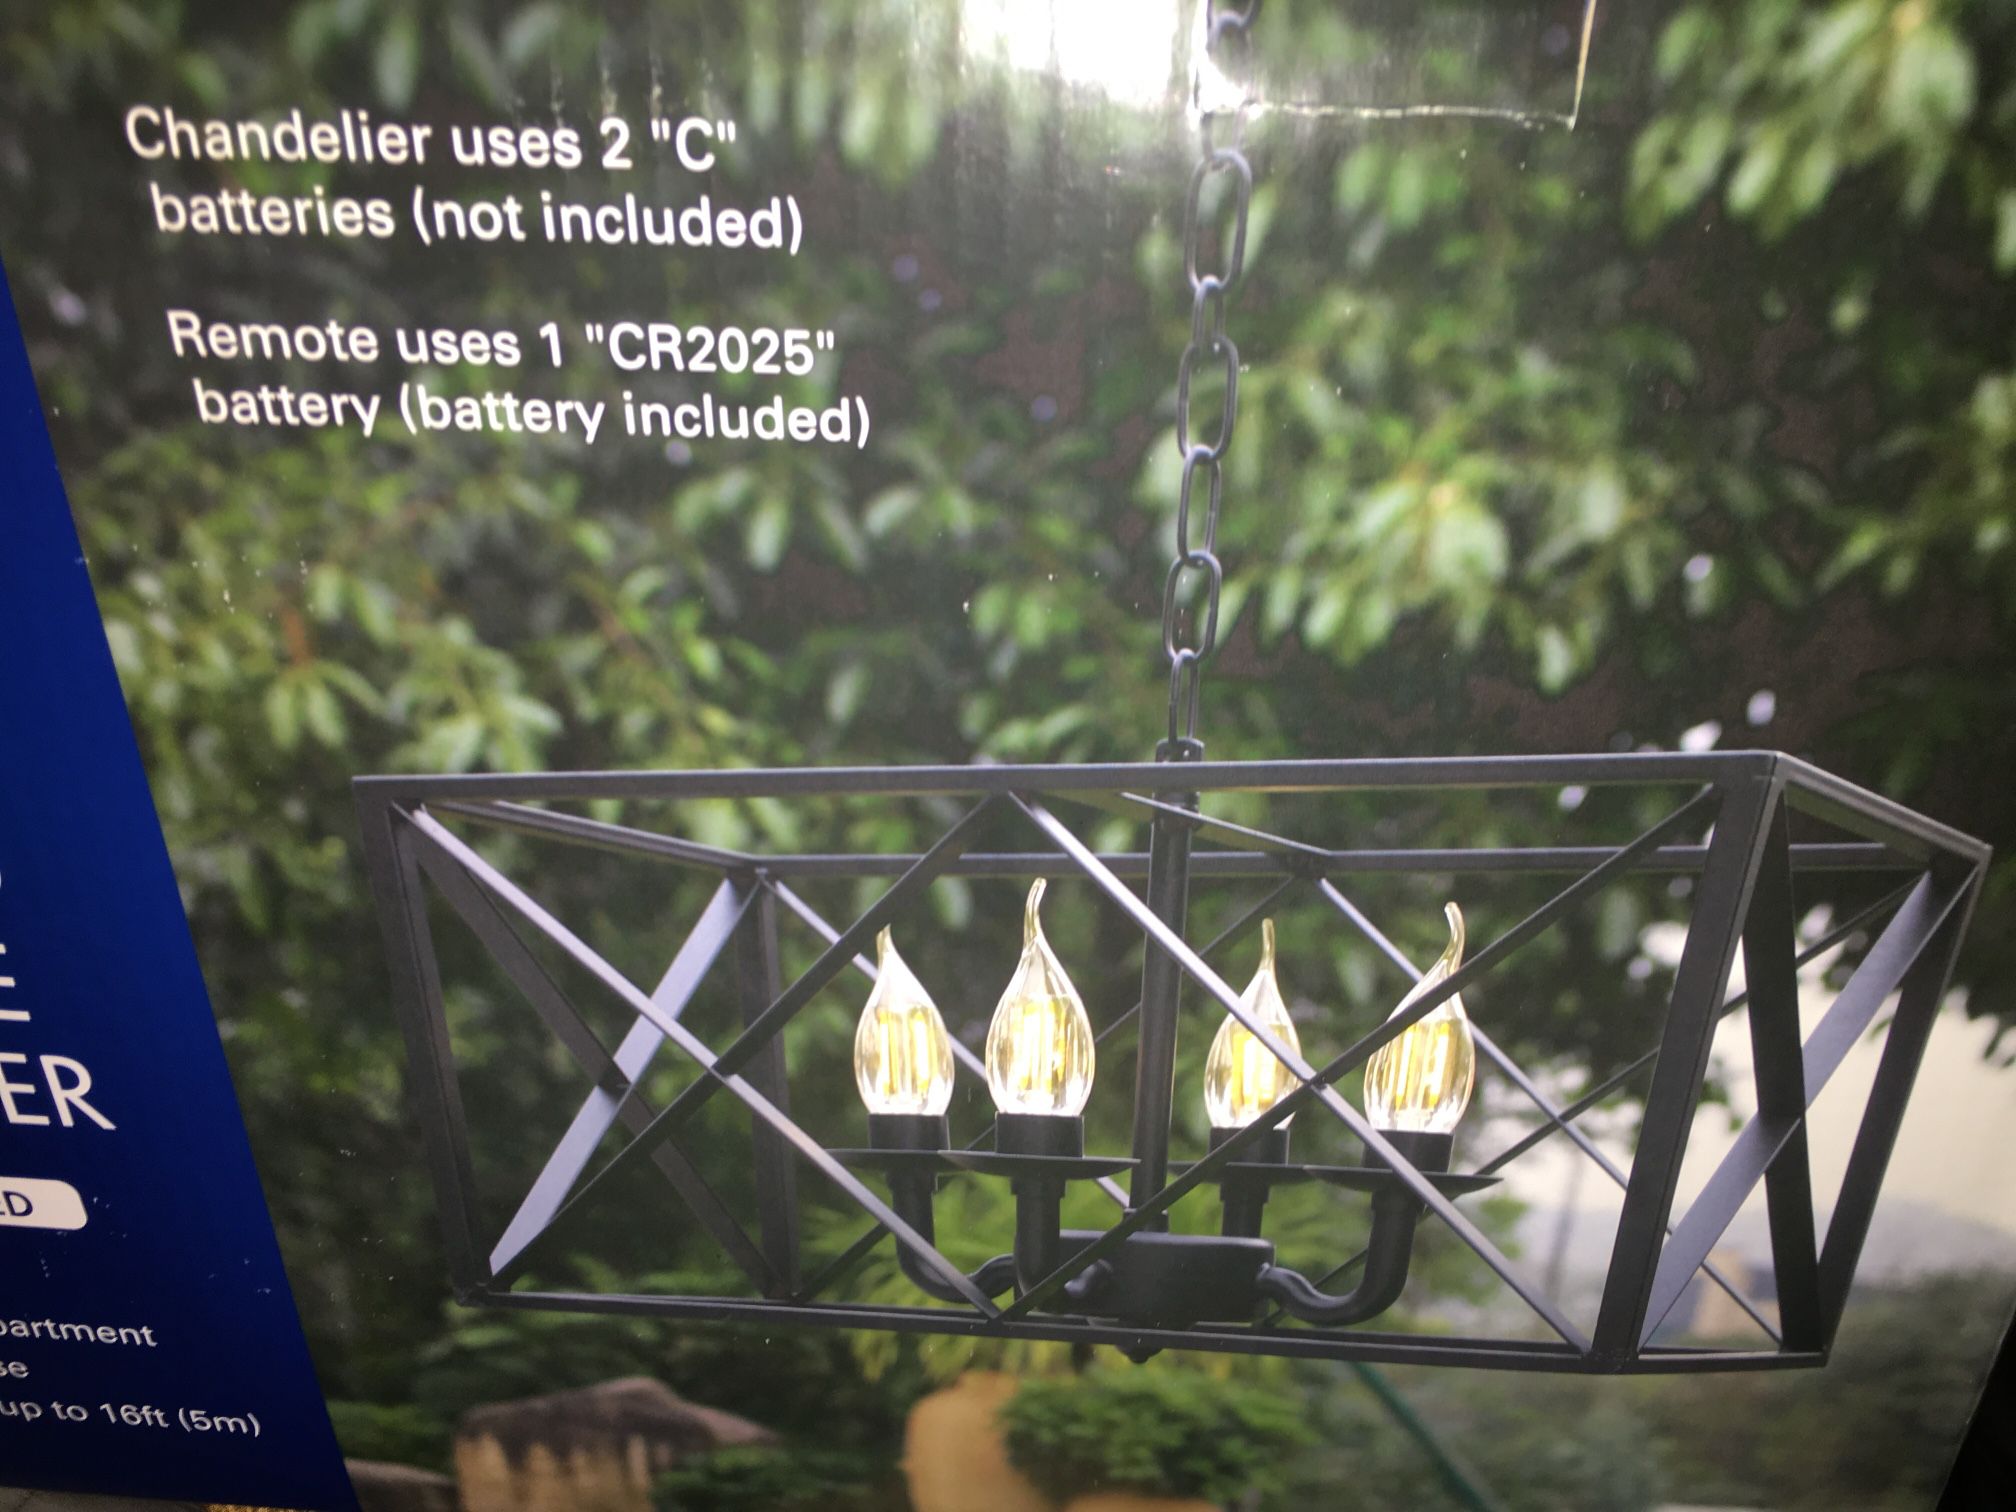 LED Candle Battery Operated Metal Chandelier 19.68”Lx17.71”Wx16.53”H Indoor/Outdoor Use Remote Control Operated 